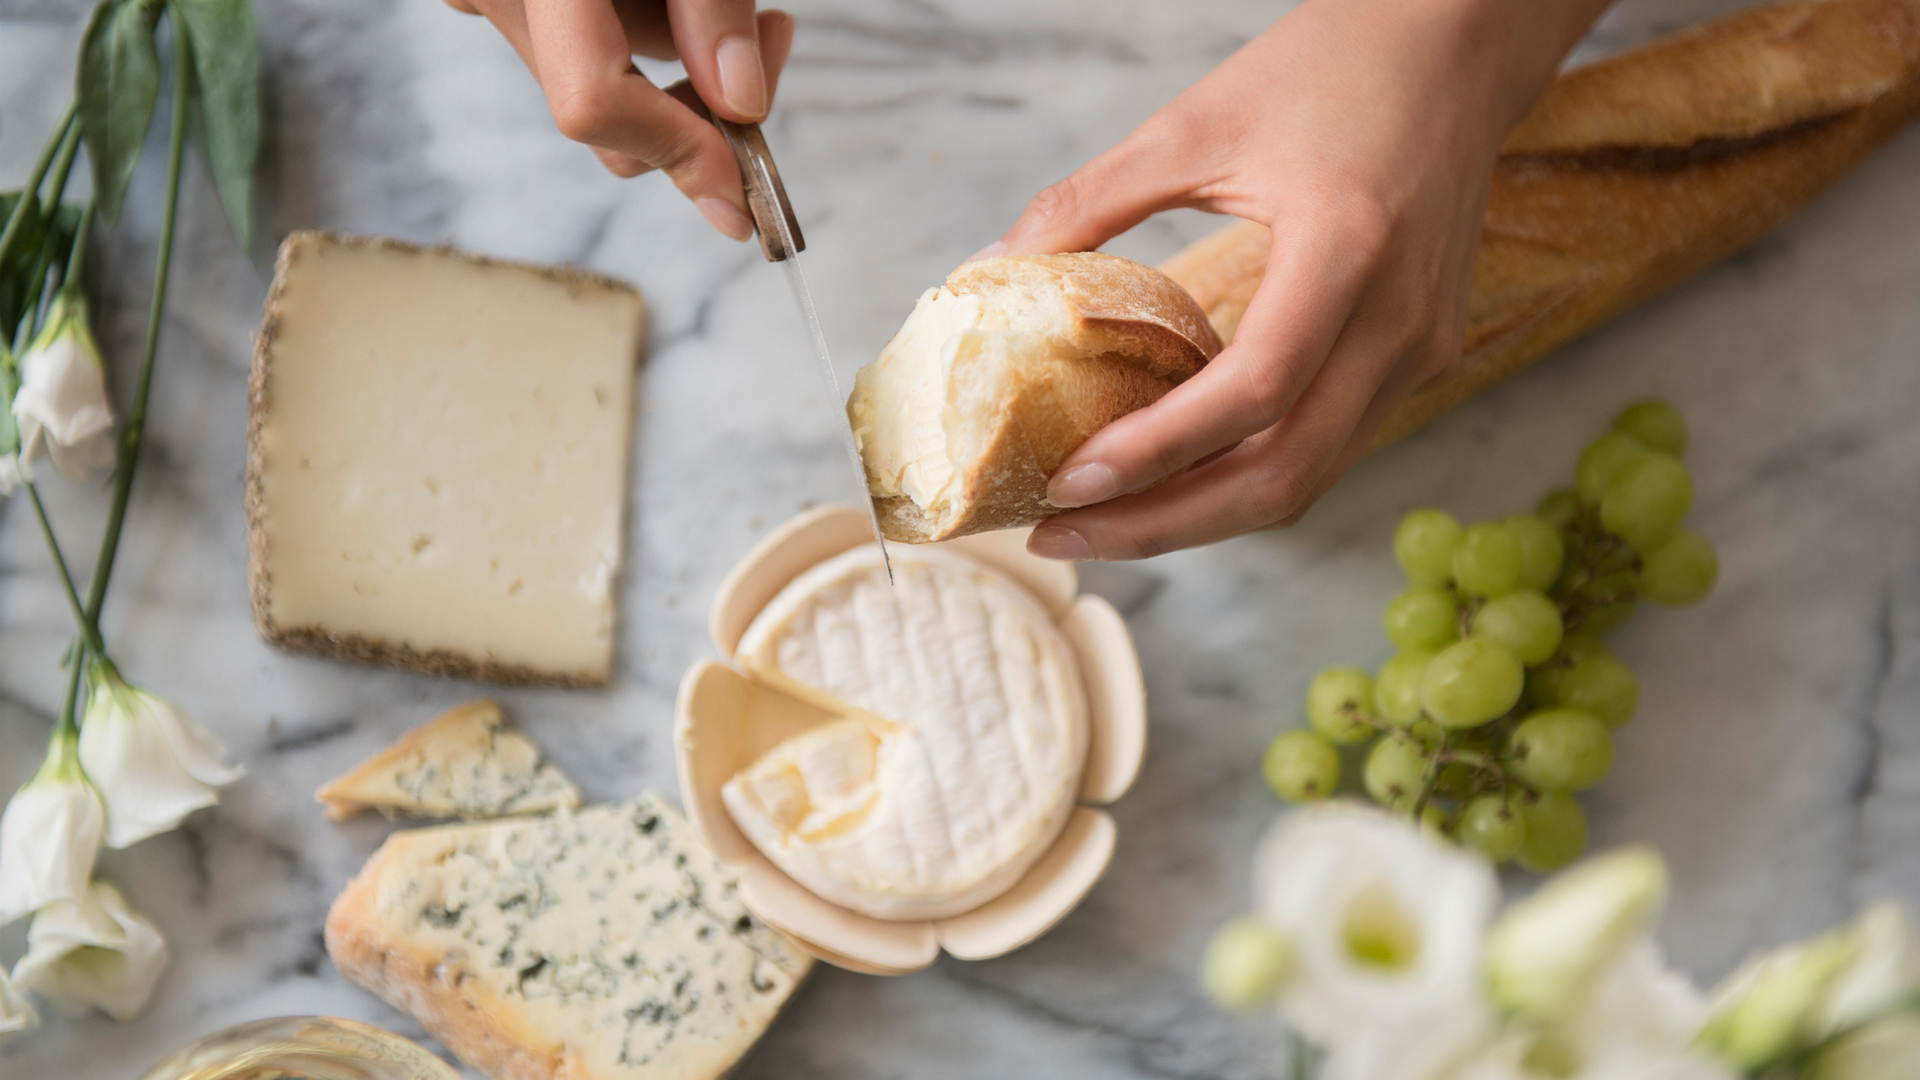 image shows a person cutting a baguette to dip into french cheese